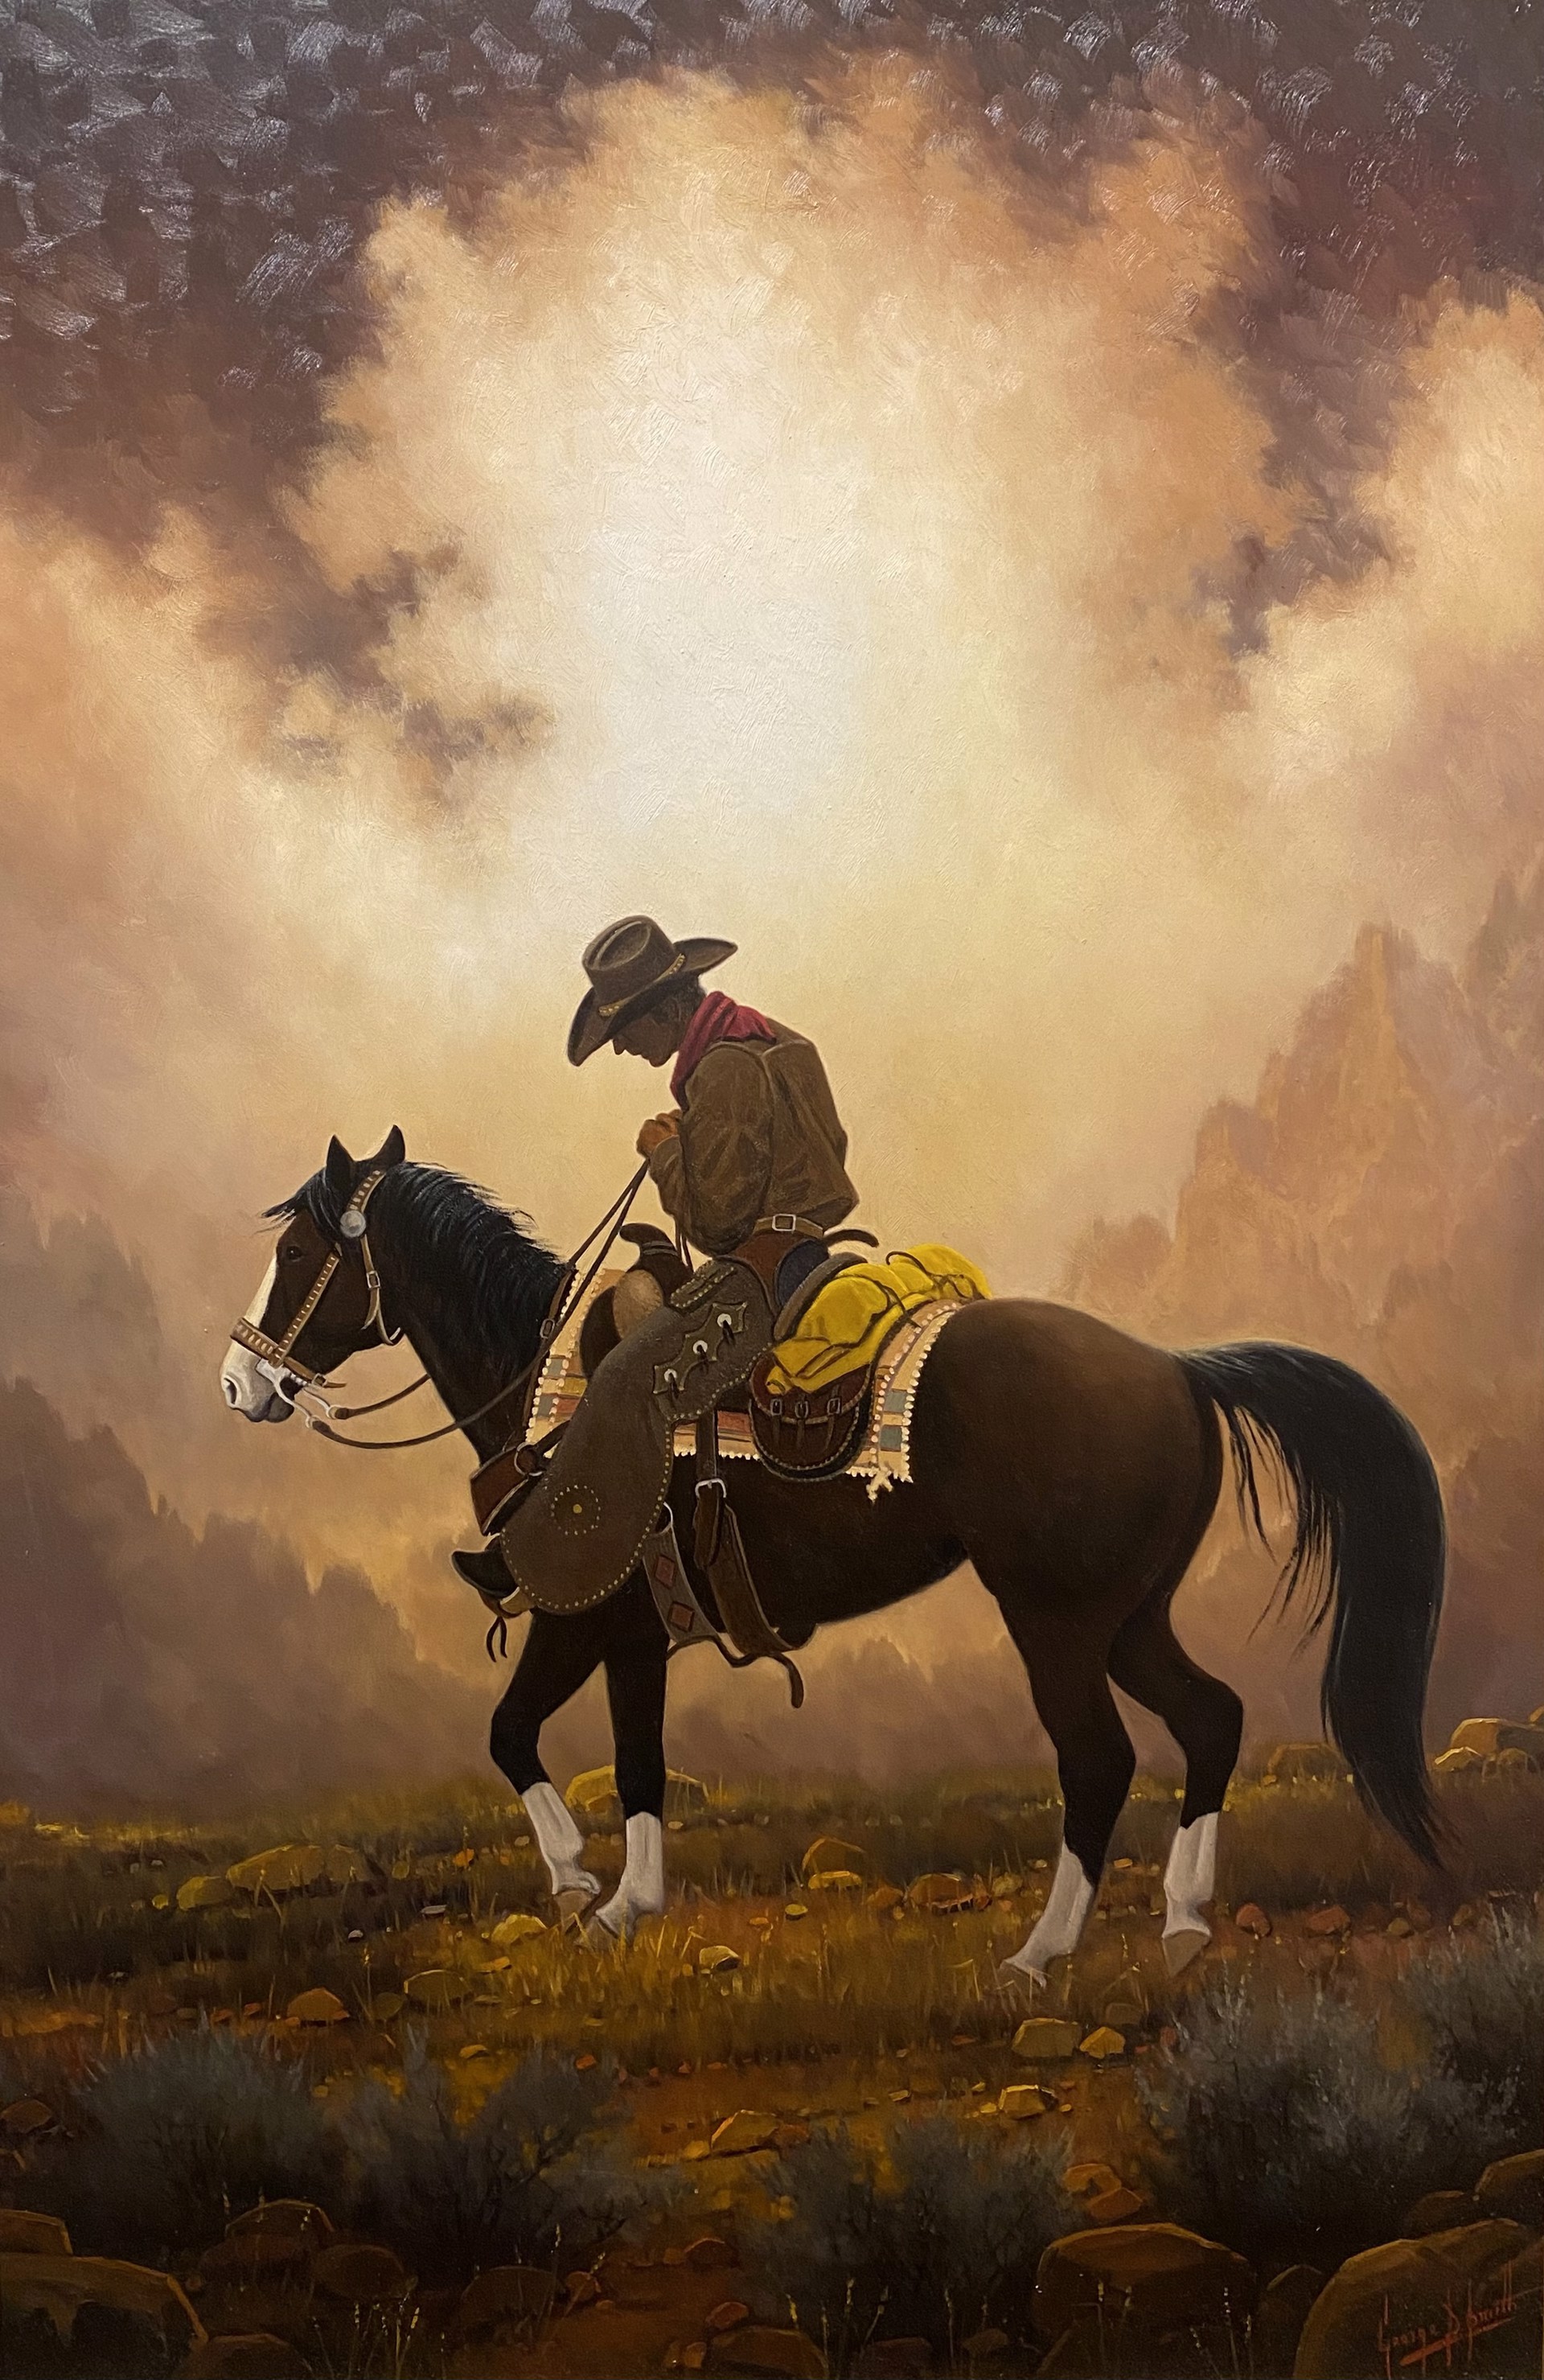 THE RANGE RIDER by George "Dee" Smith